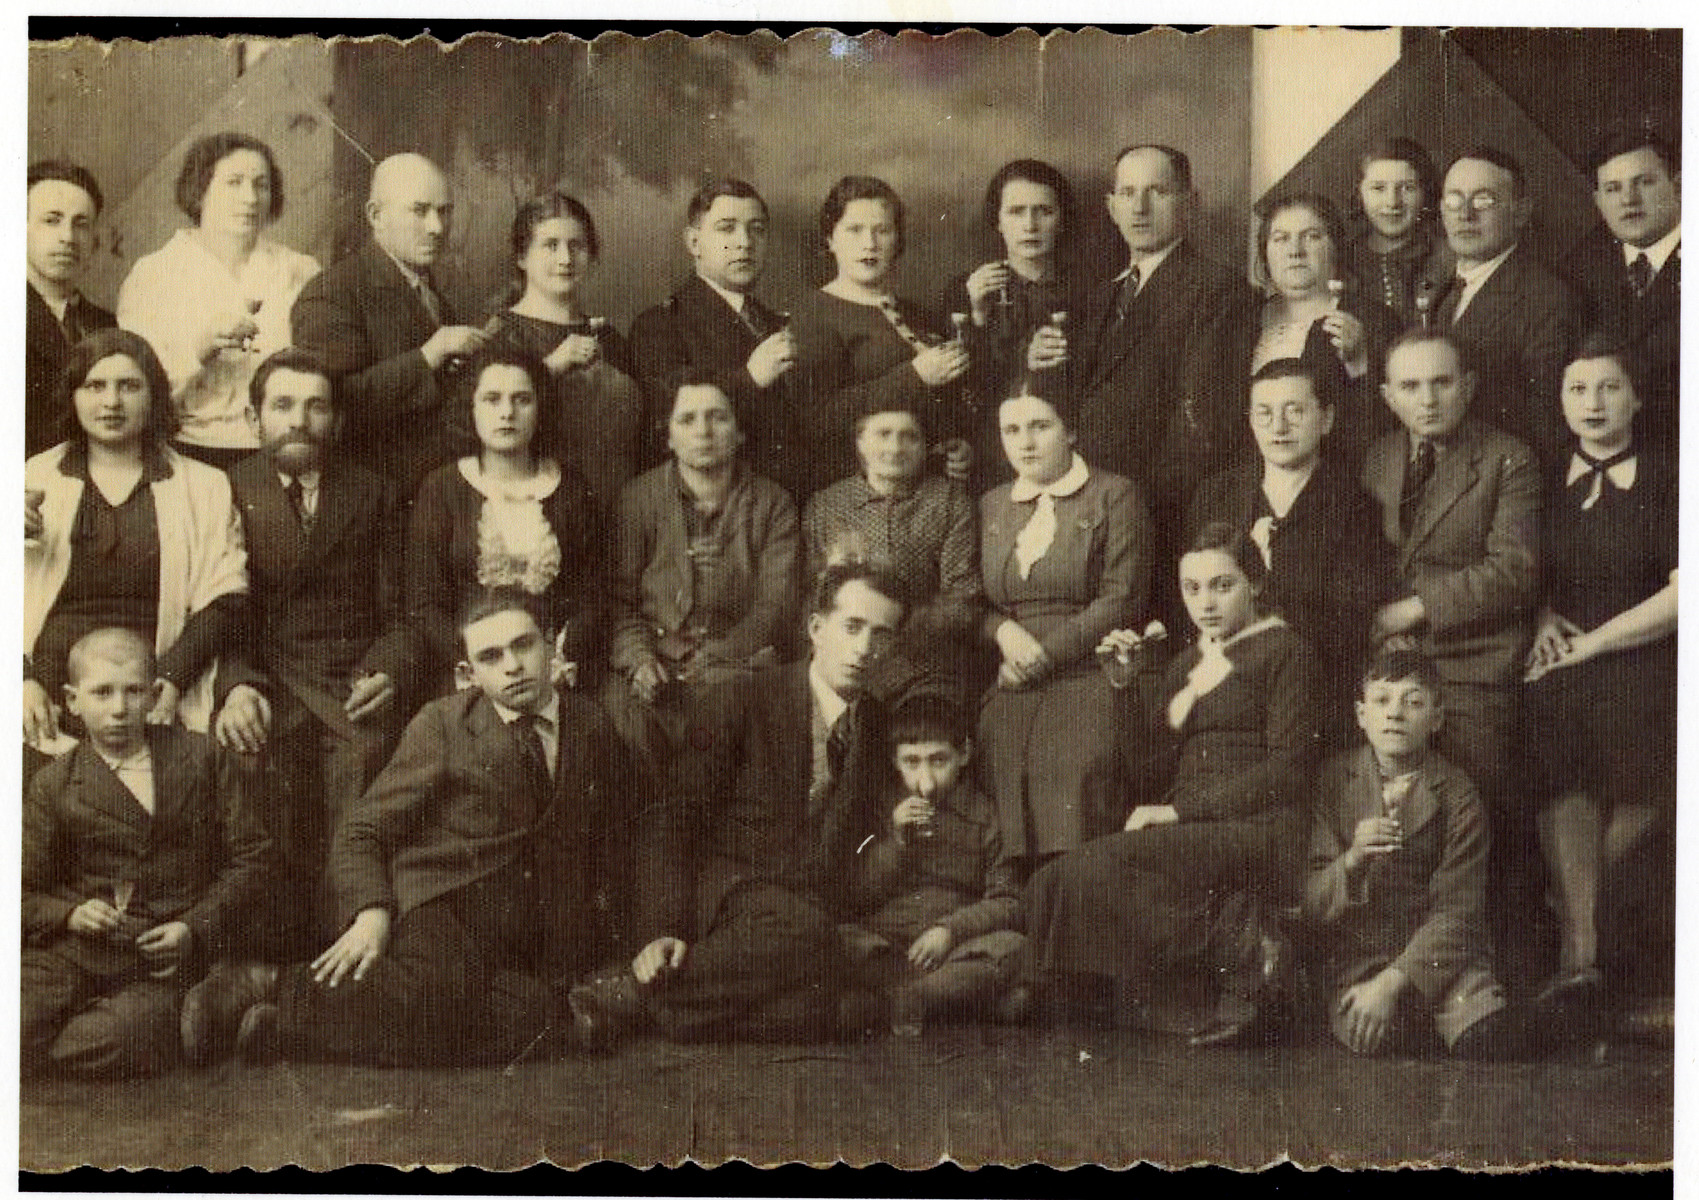 The extended maternal family of Sara Borzykowski celebrate the impending emigration of a cousin.  

Pictured are members of the Krause family and Wilhelm families (Sara Fogelman's maternal relatives).  Among those pictured are Hersh Fogelman (5th from left, top row) and his wife Sara Fogelman standing next to him.  Wolf Borzykowski (Sara's brother) is standing on the top row, far right.